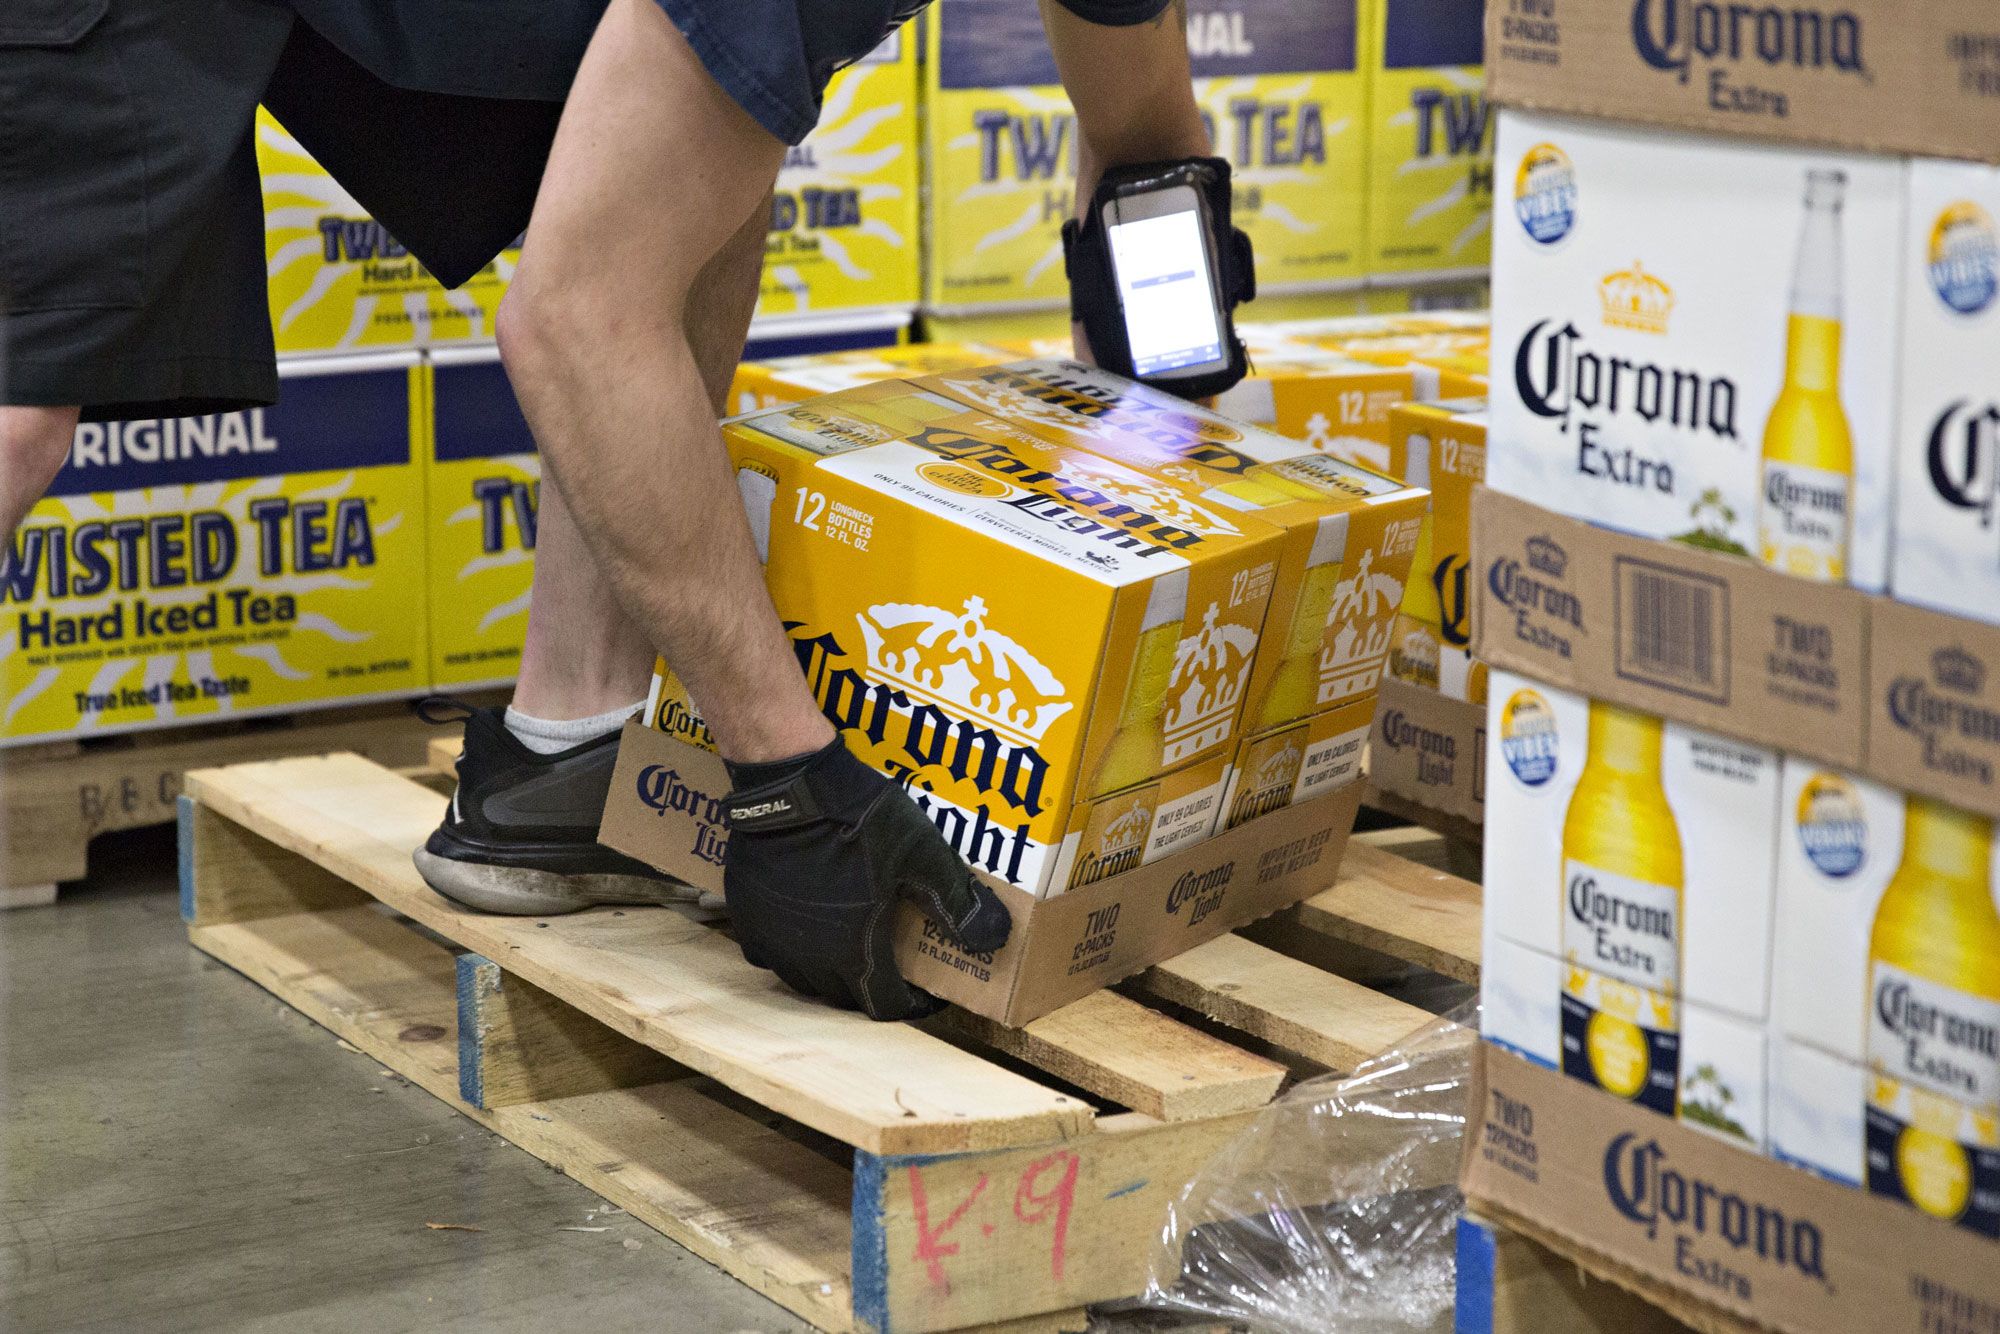 Corona brewer's stock climbs after earnings beat